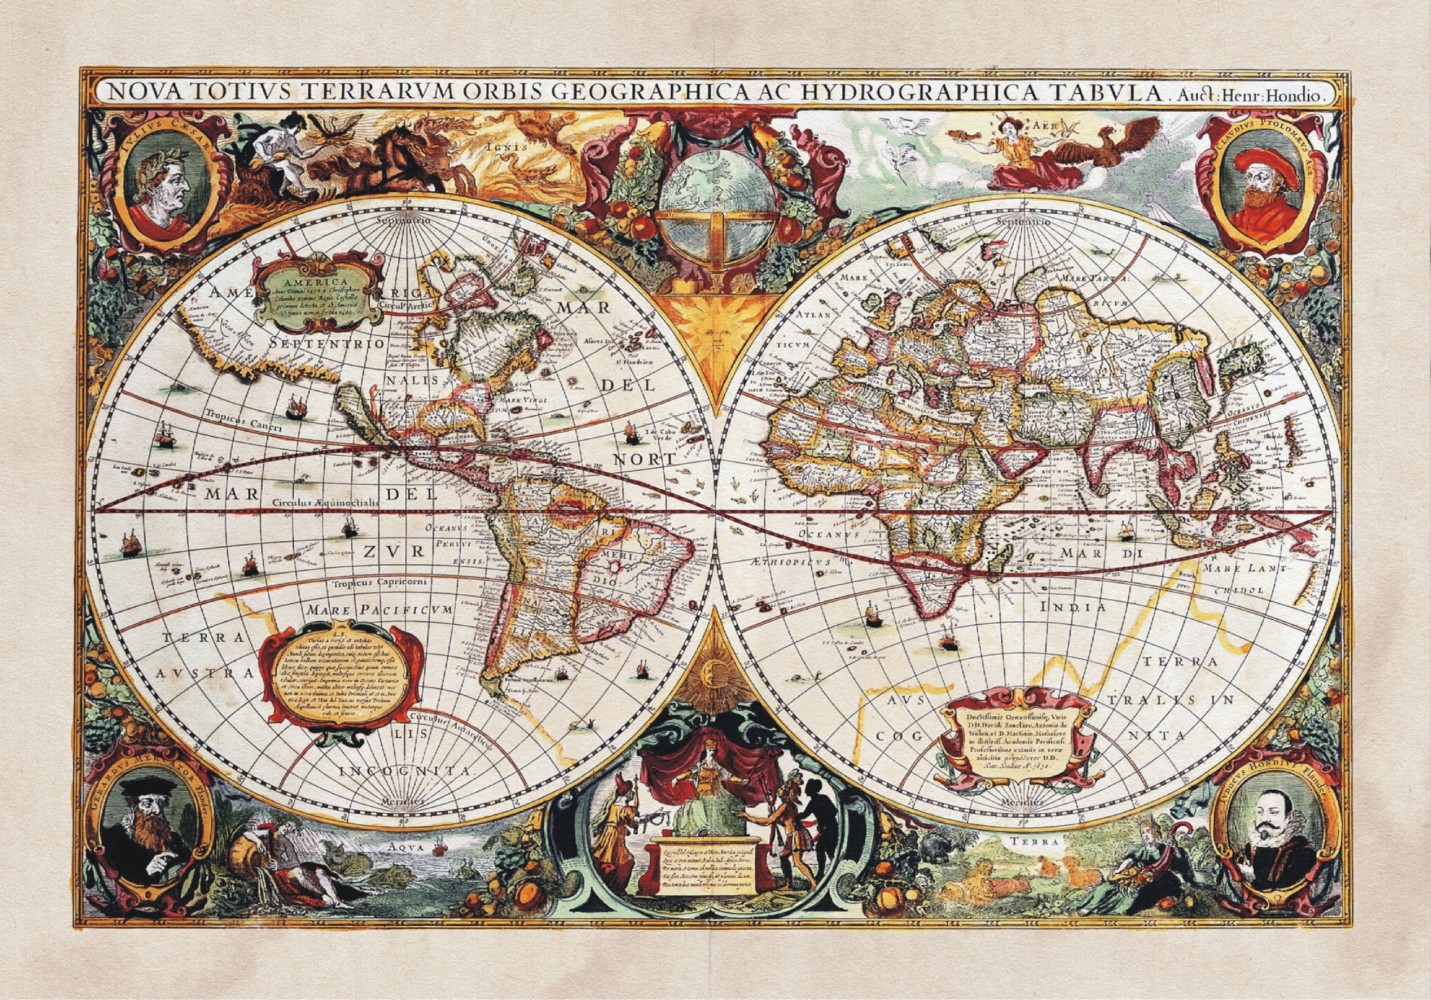 XXL Poster Wall mural wallpaper history world map geography photo 160